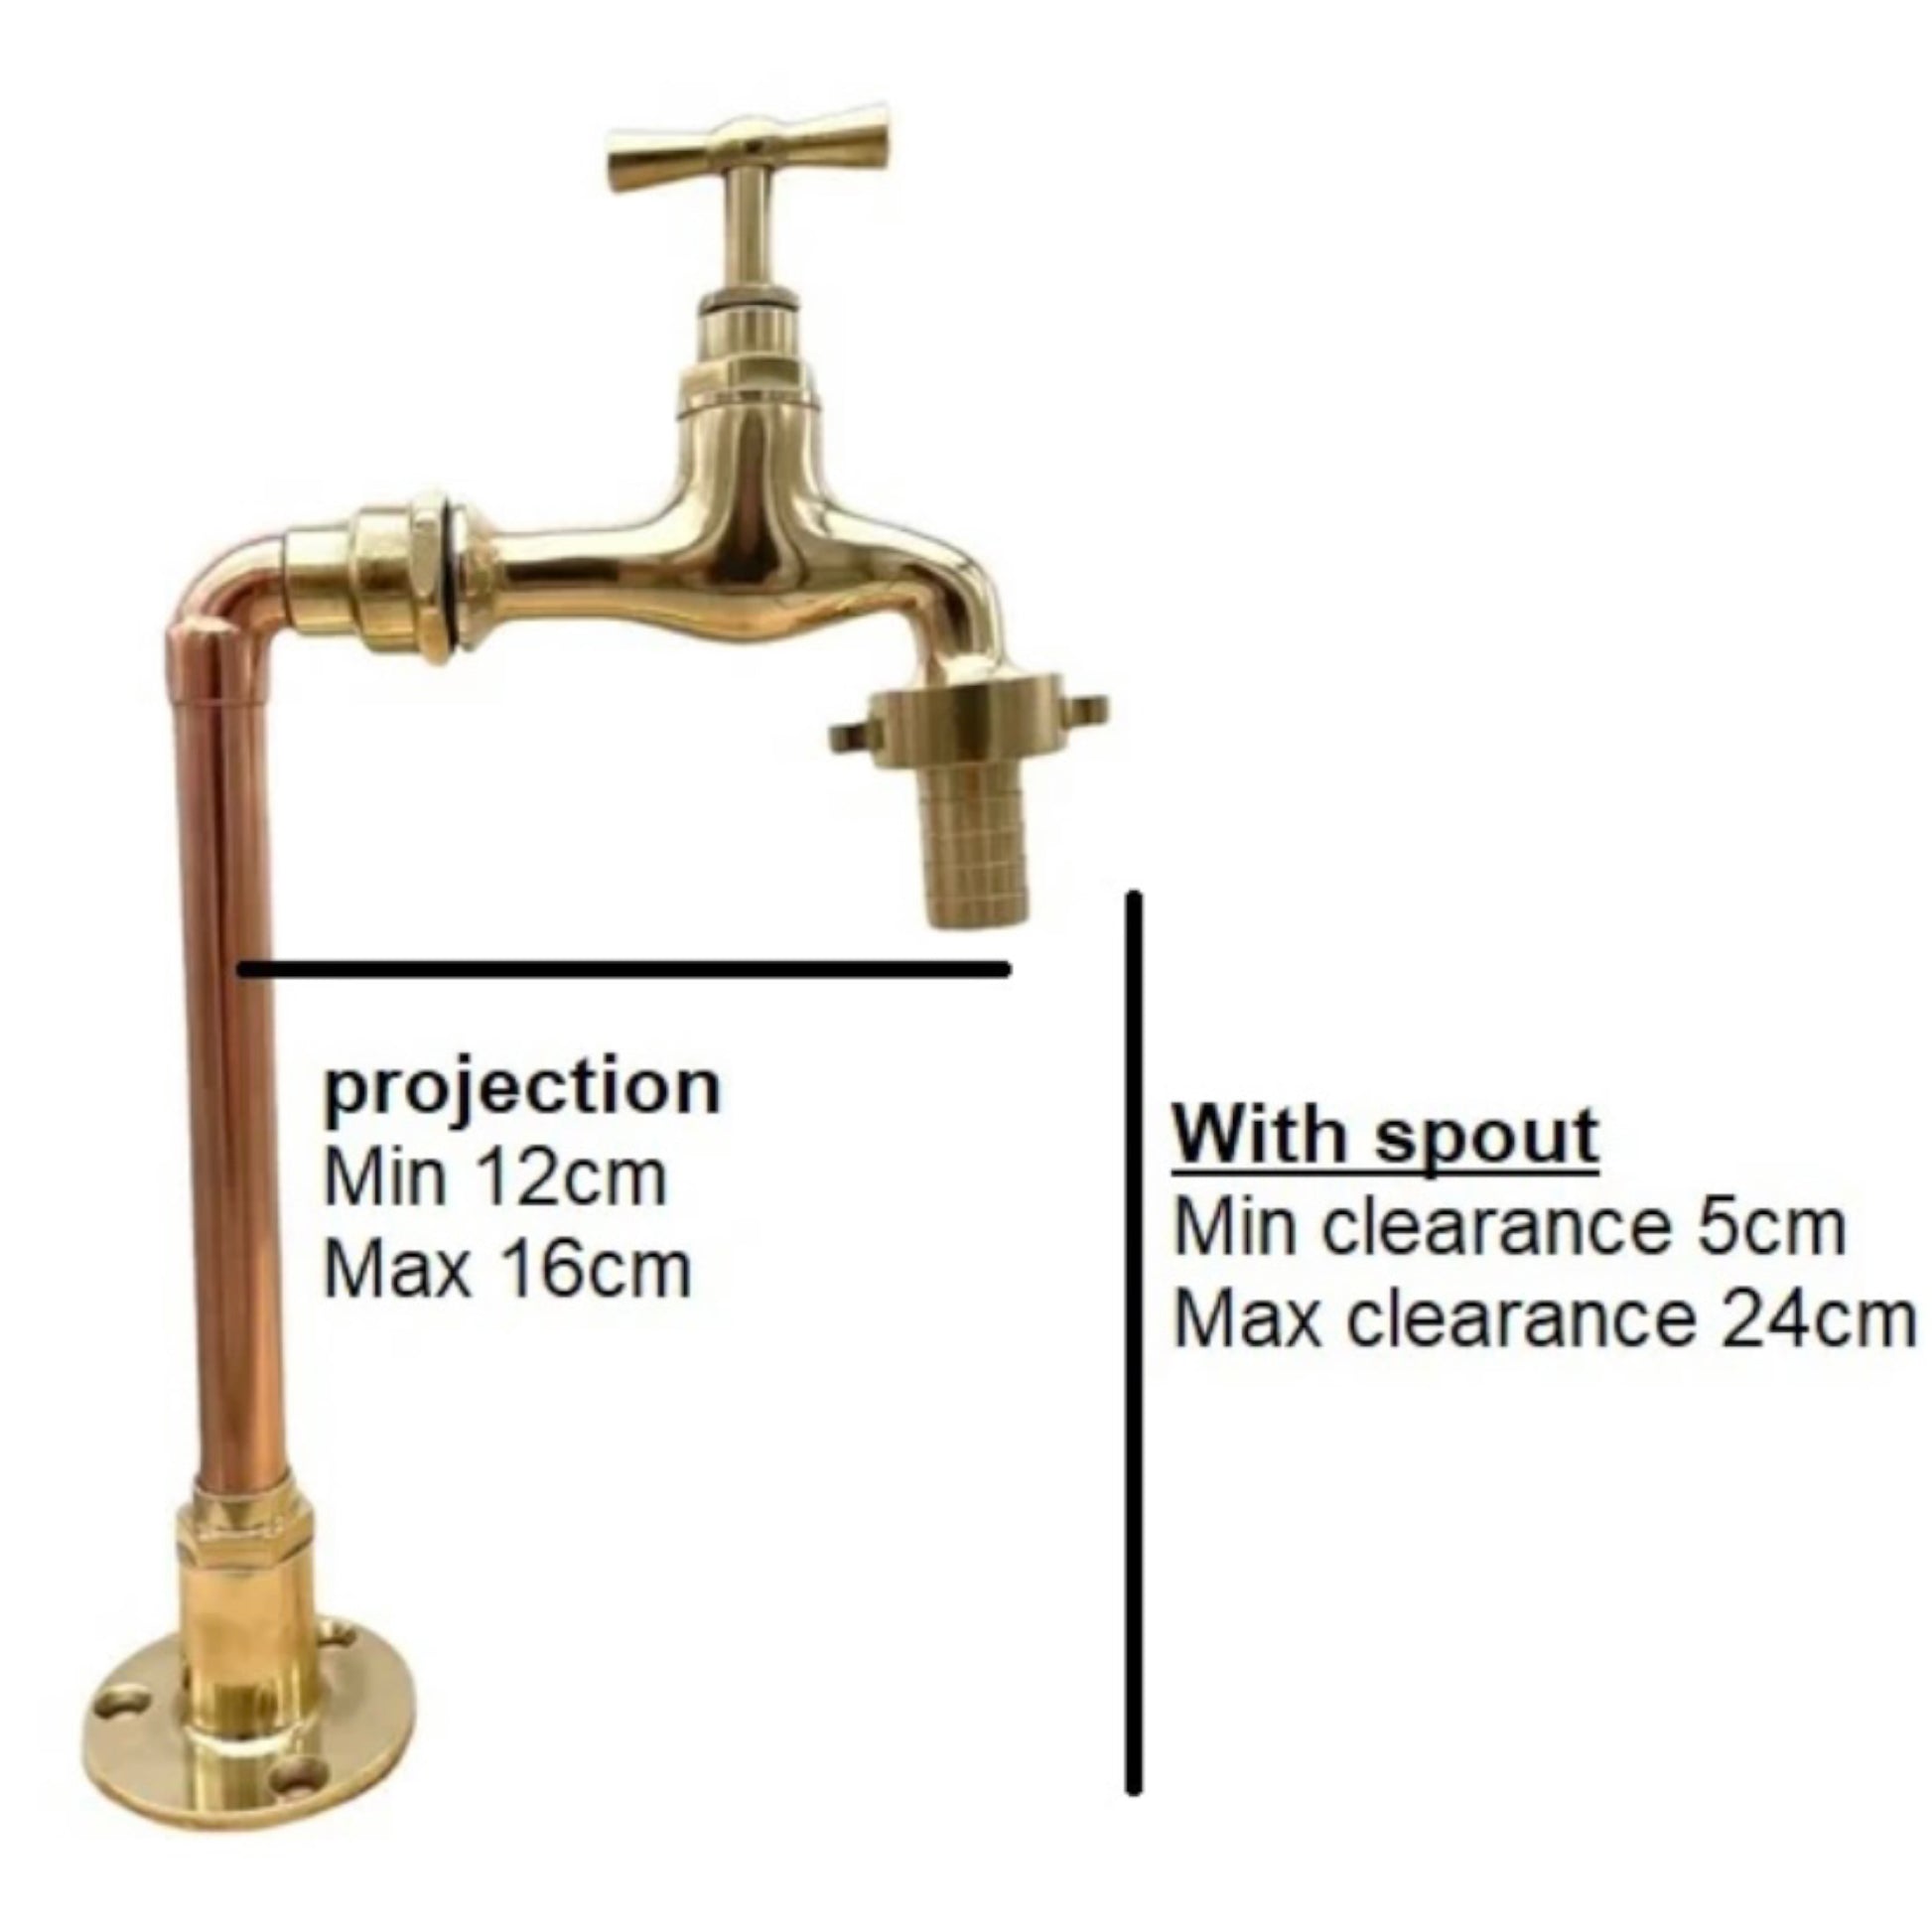 Copper and brass handmade custom size taps sold by All Things French Store